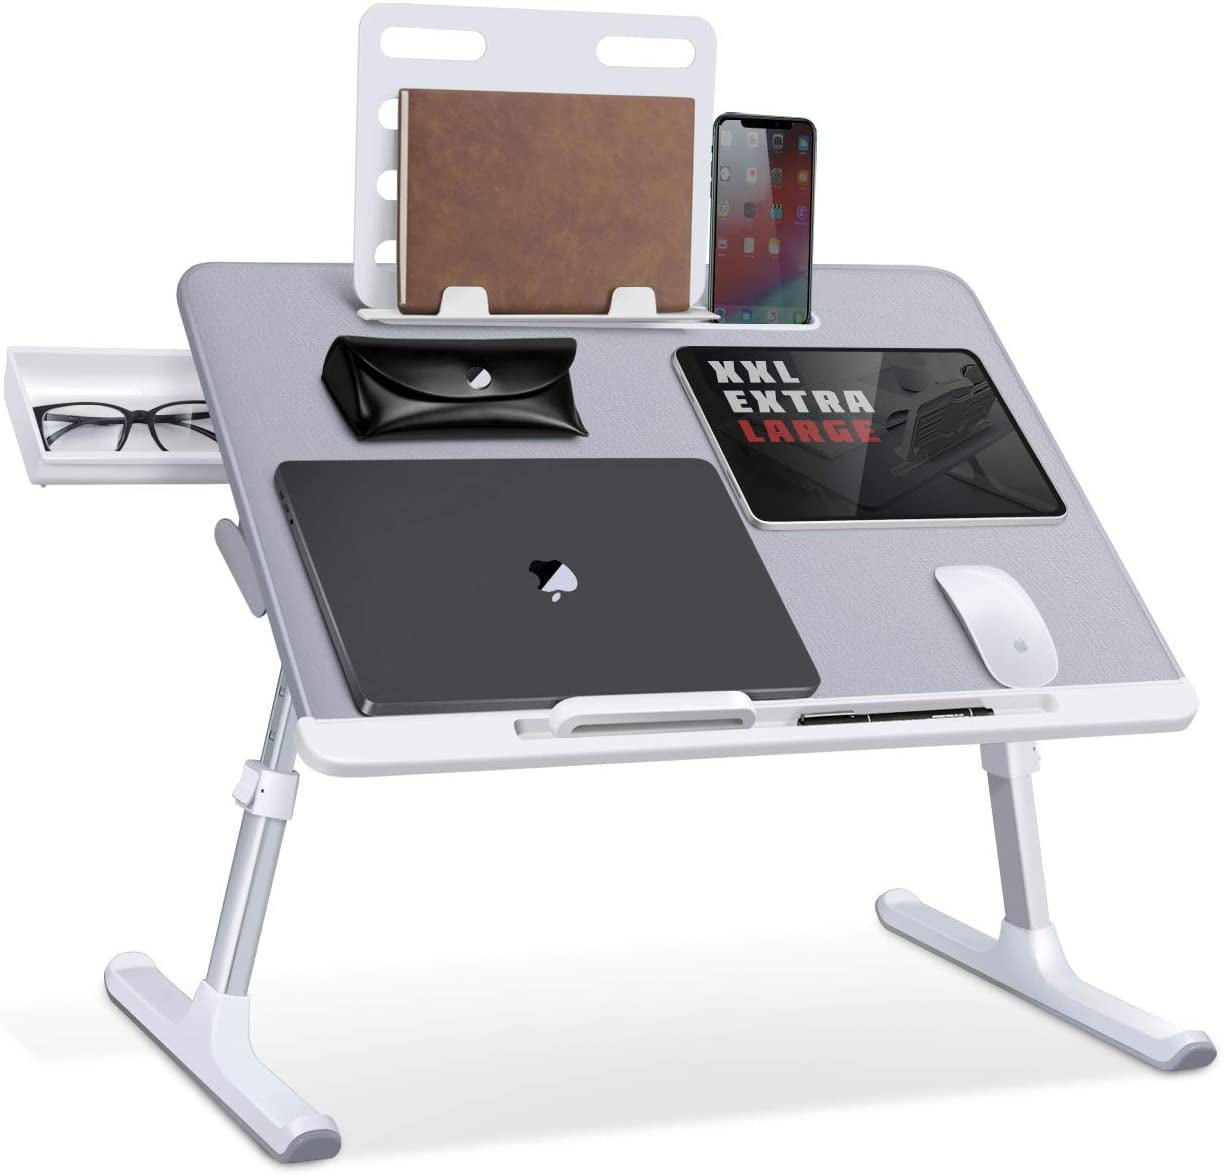 SAIJI Laptop Bed Tray Desk, Adjustable Laptop Stand for Bed, Foldable  Laptop Table with Storage Drawer for Eating, Working, Writing, Gaming,  Drawing 